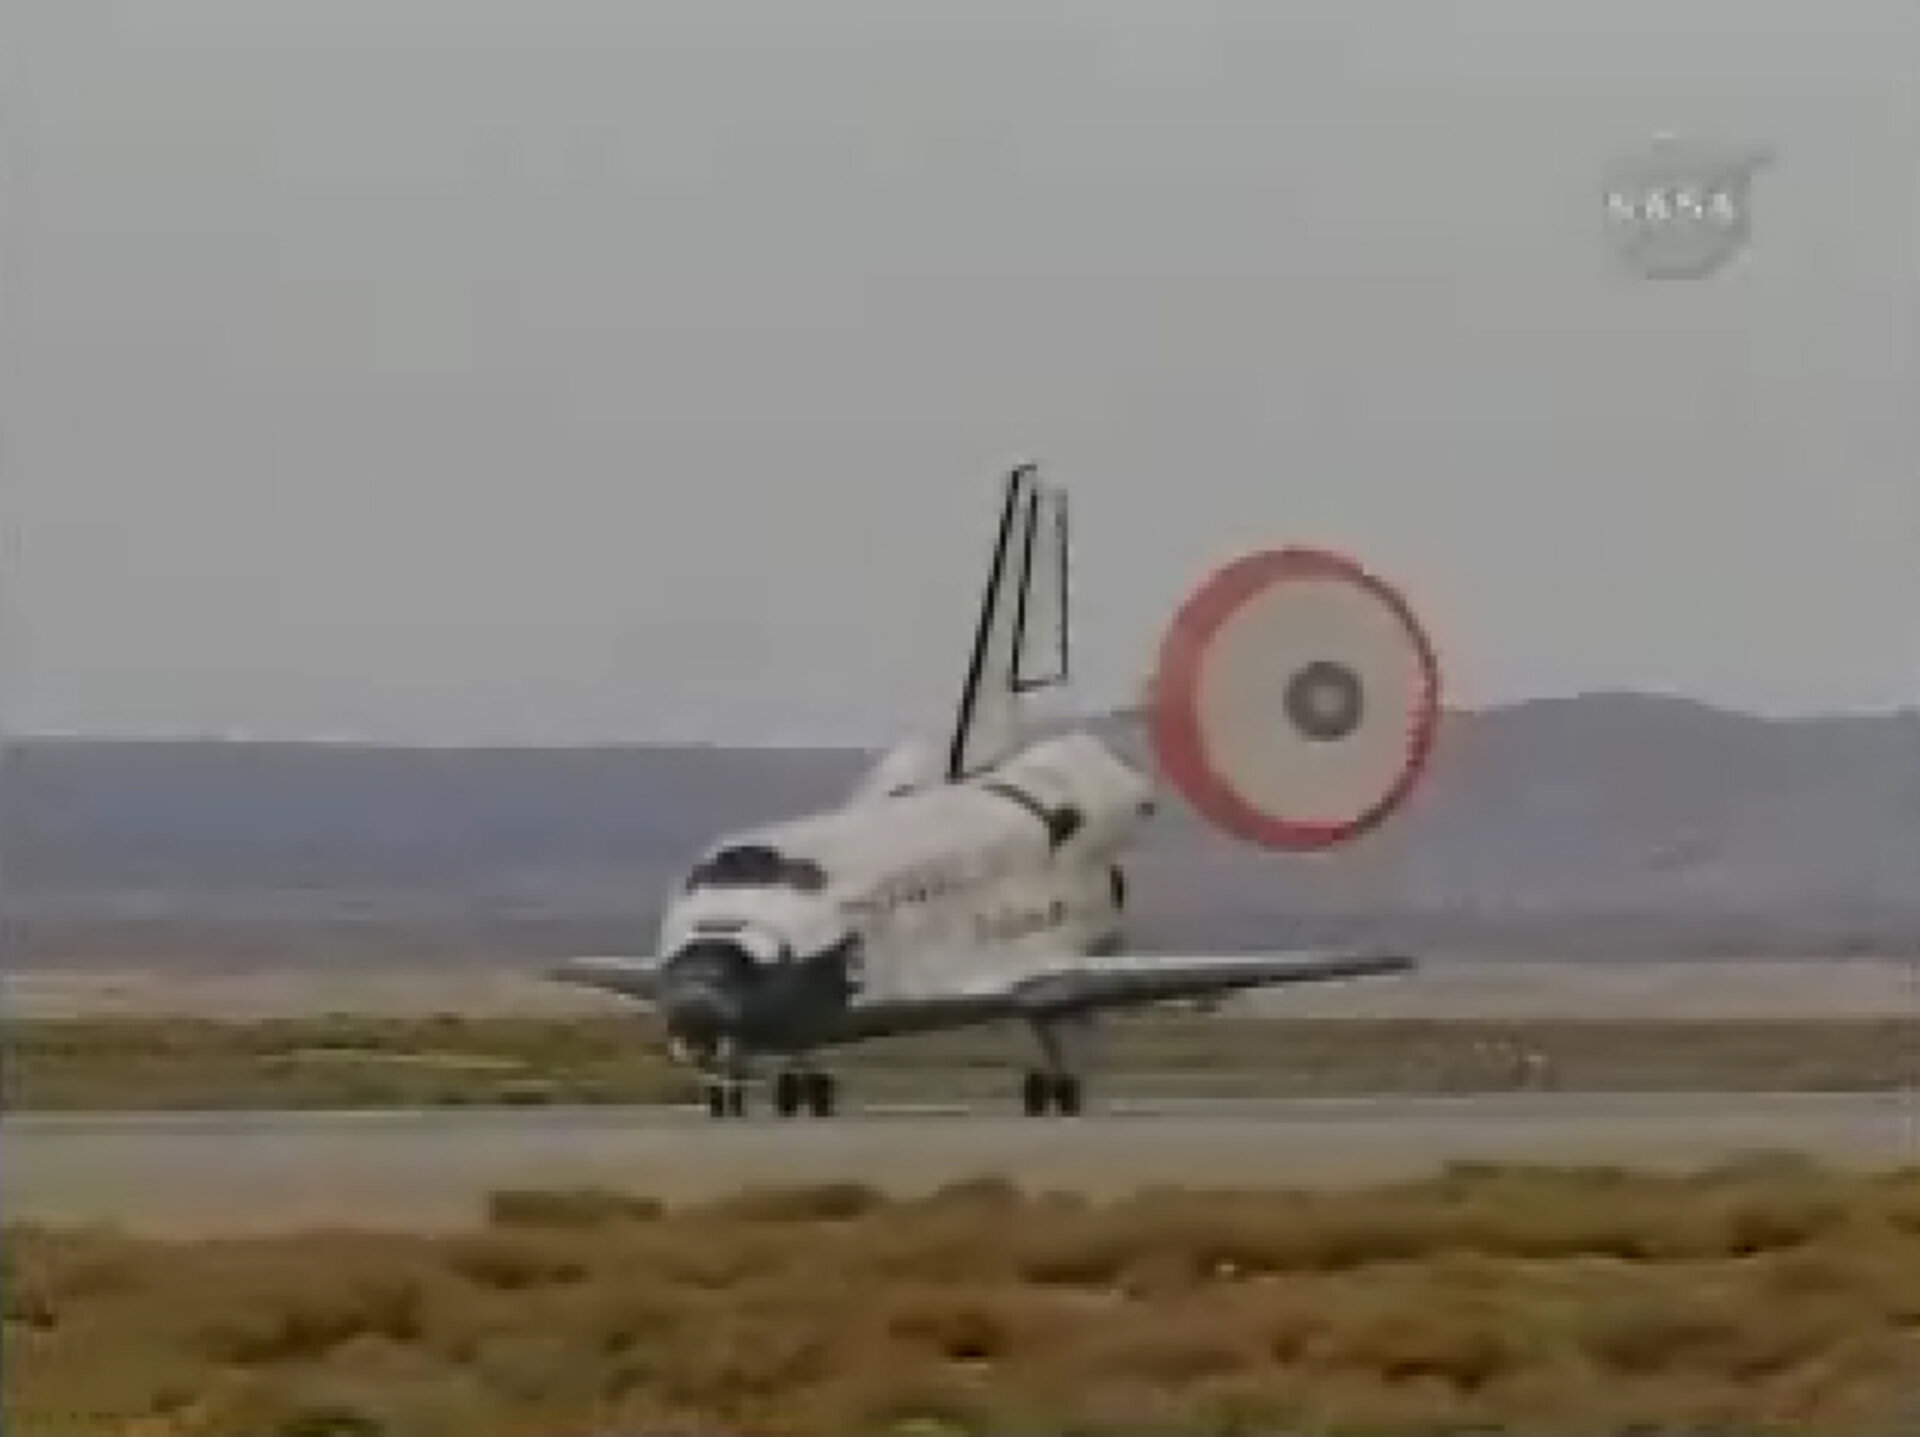 Landing of Space Shuttle Discovery at the end of the STS-128 mission